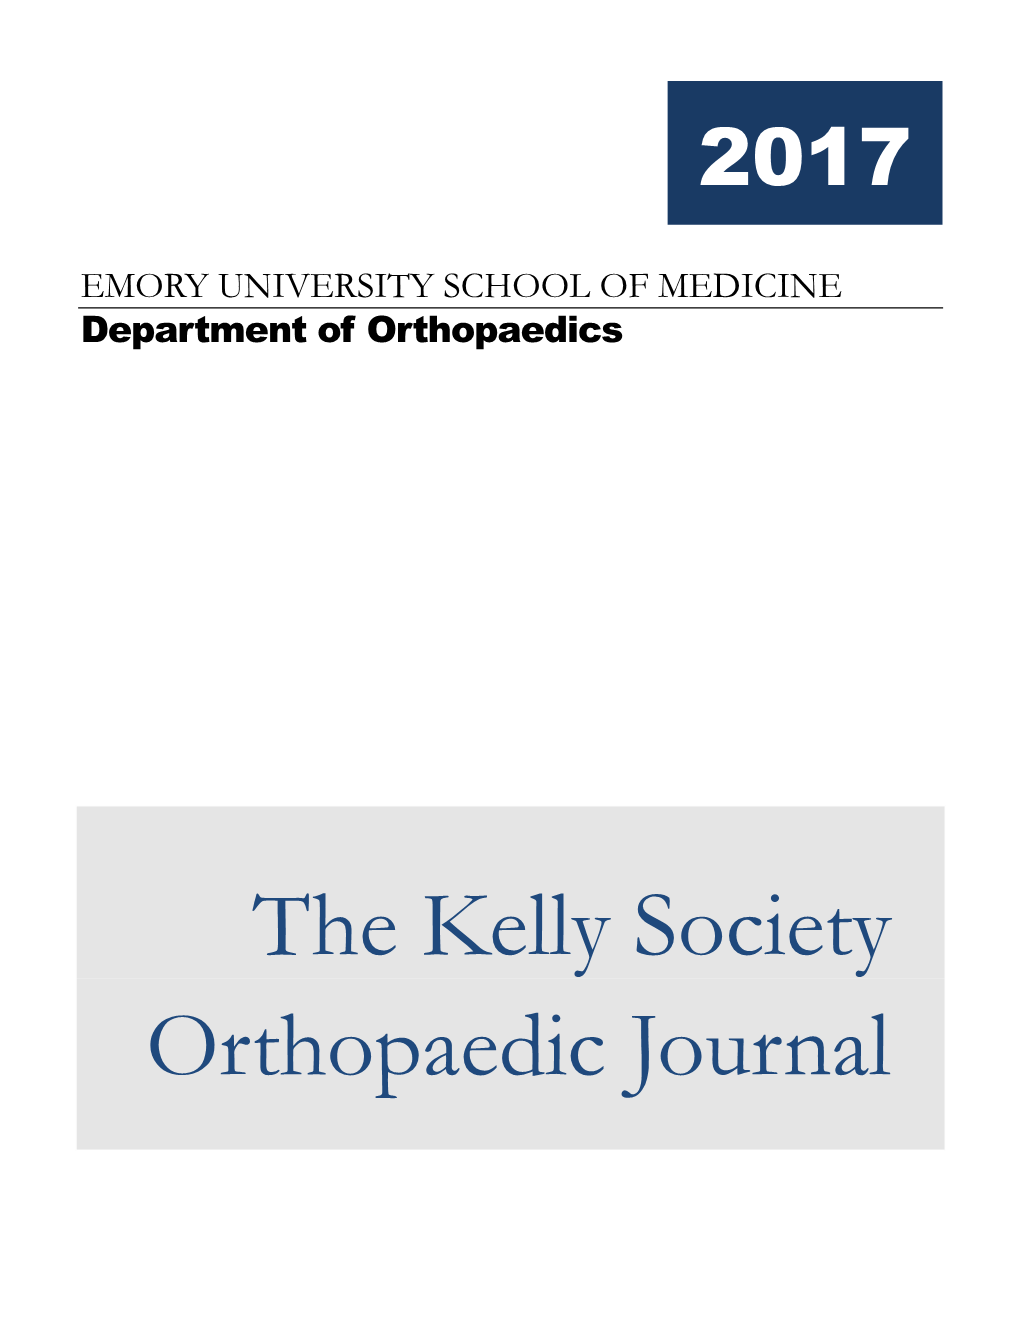 The Kelly Society Orthopaedic Journal Table of Contents